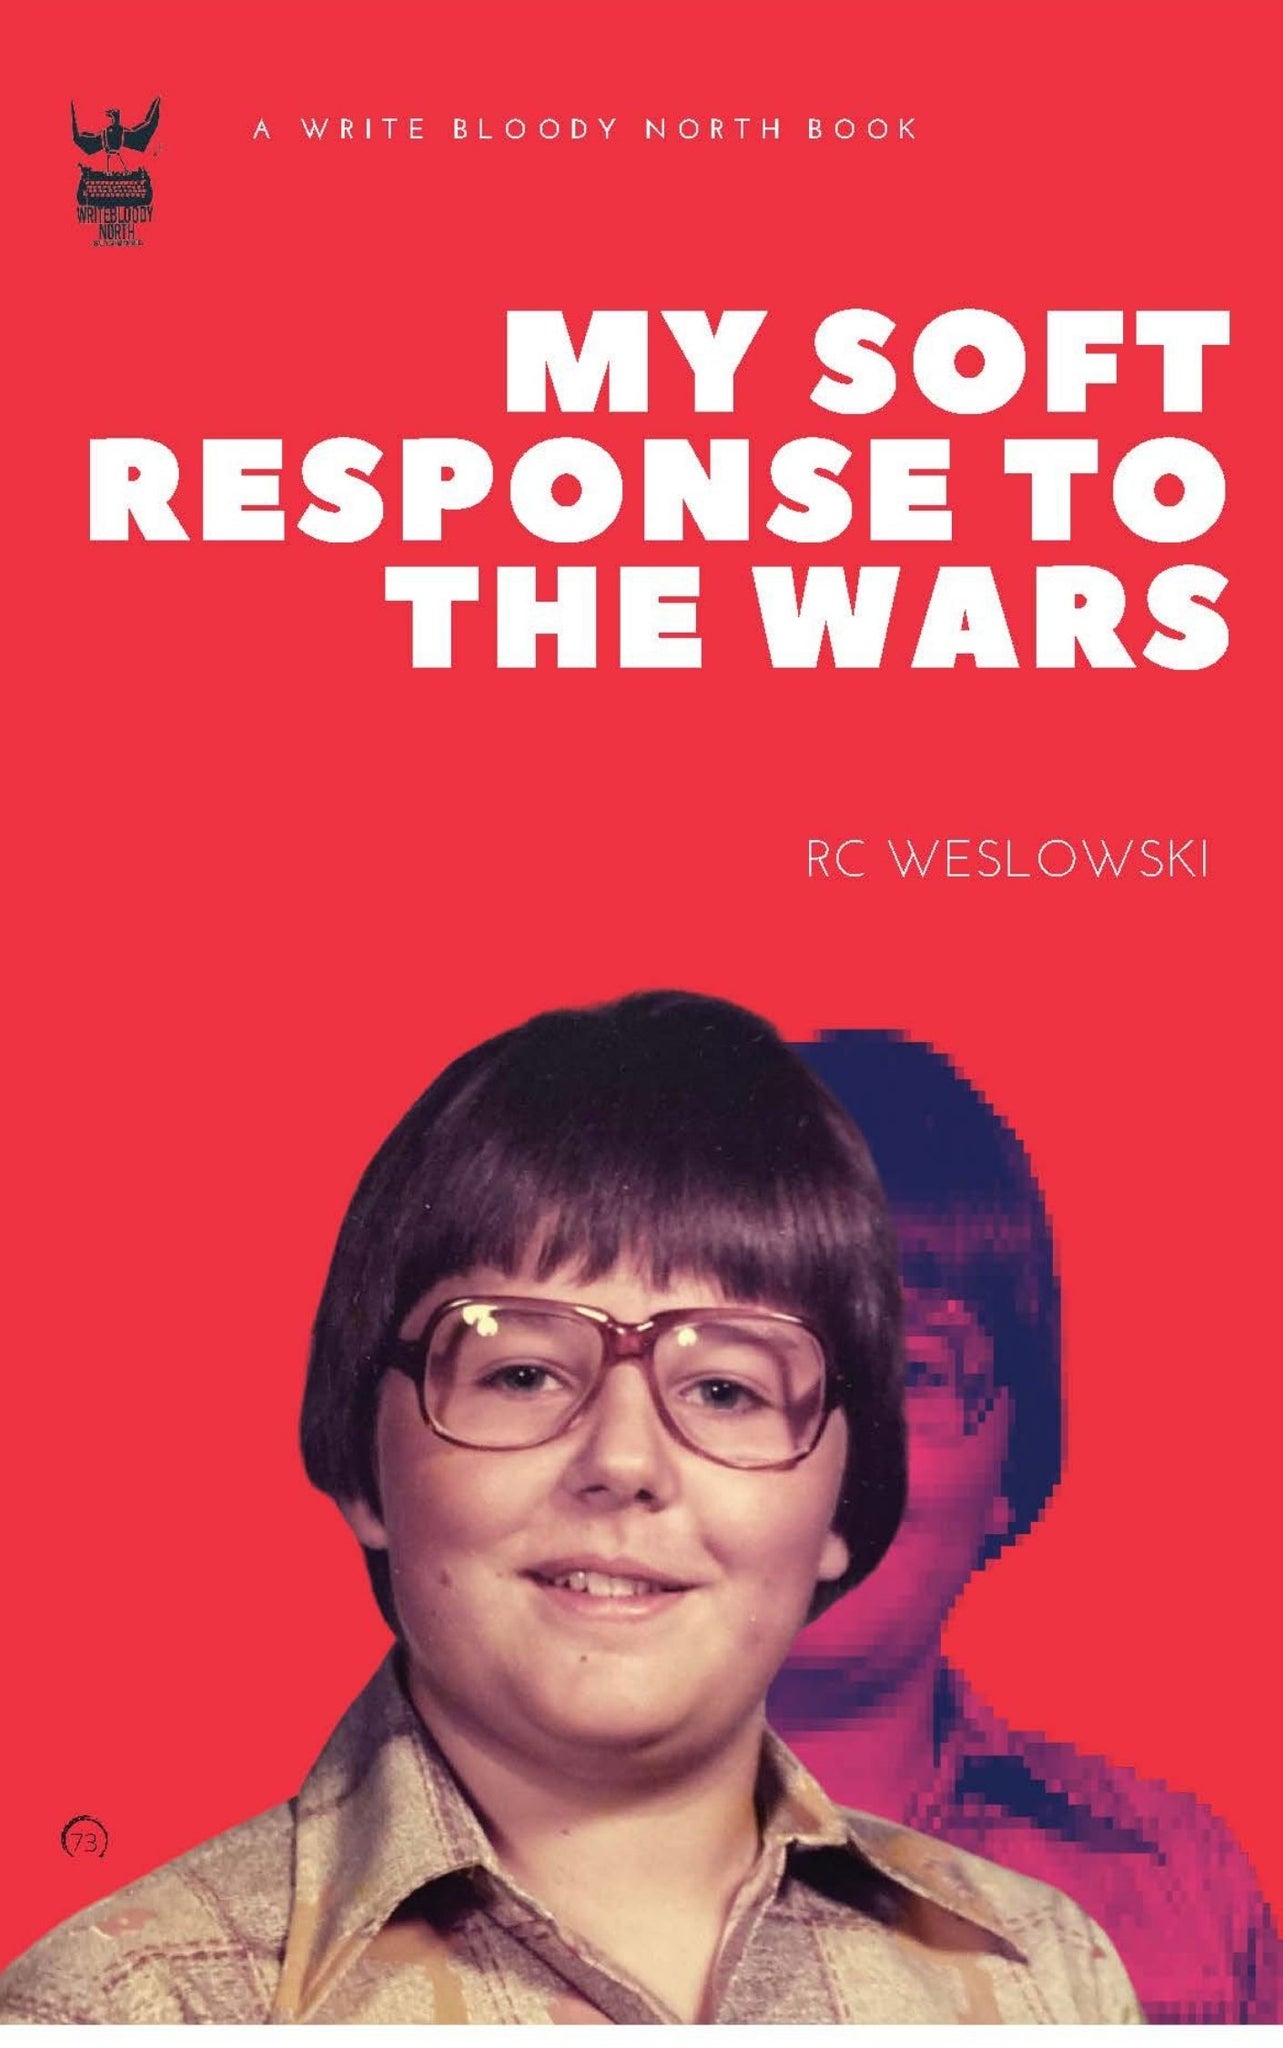 My Soft Response To The Wars by RC Weslowski